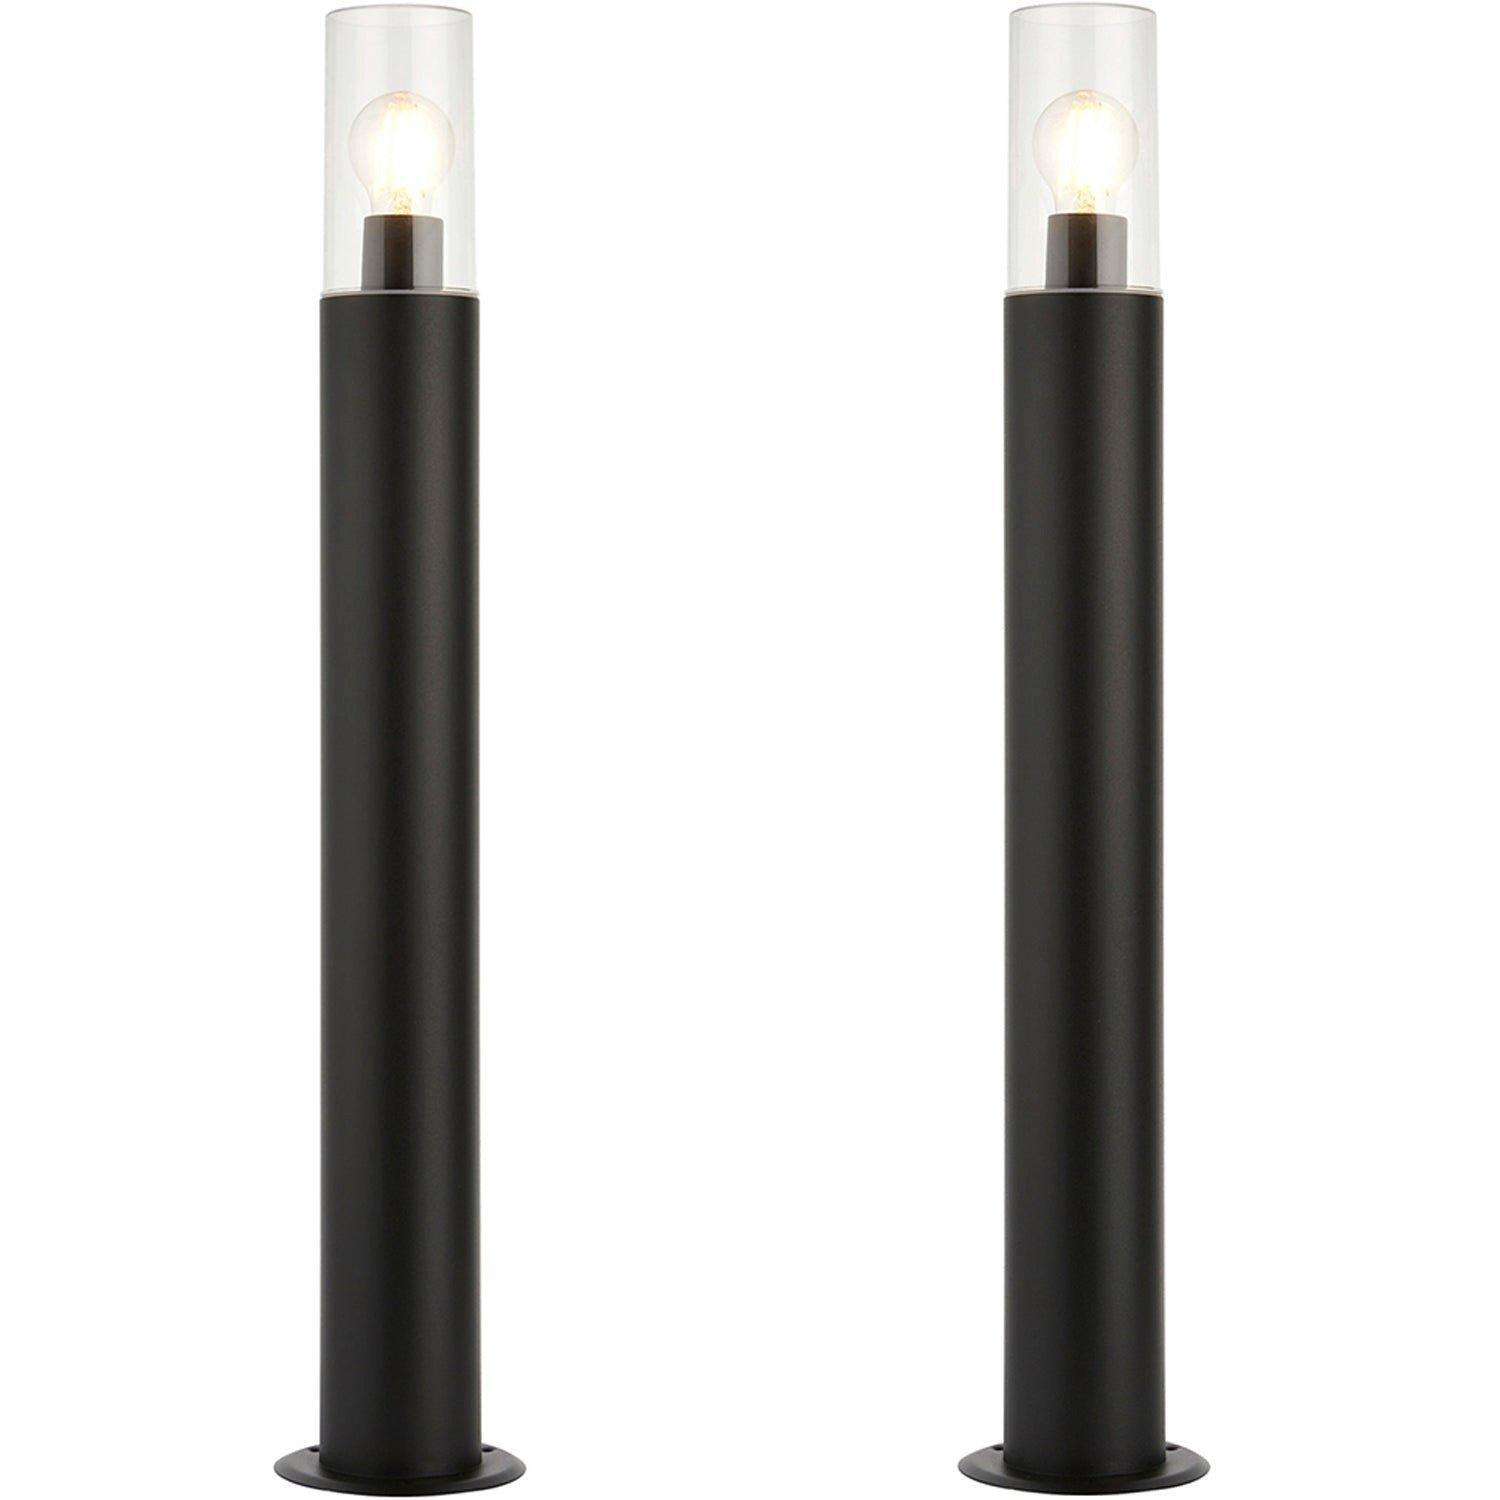 2 PACK Outdoor Bollard Post Light - 15W E27 LED - 800mm Height - Stainless Steel - image 1